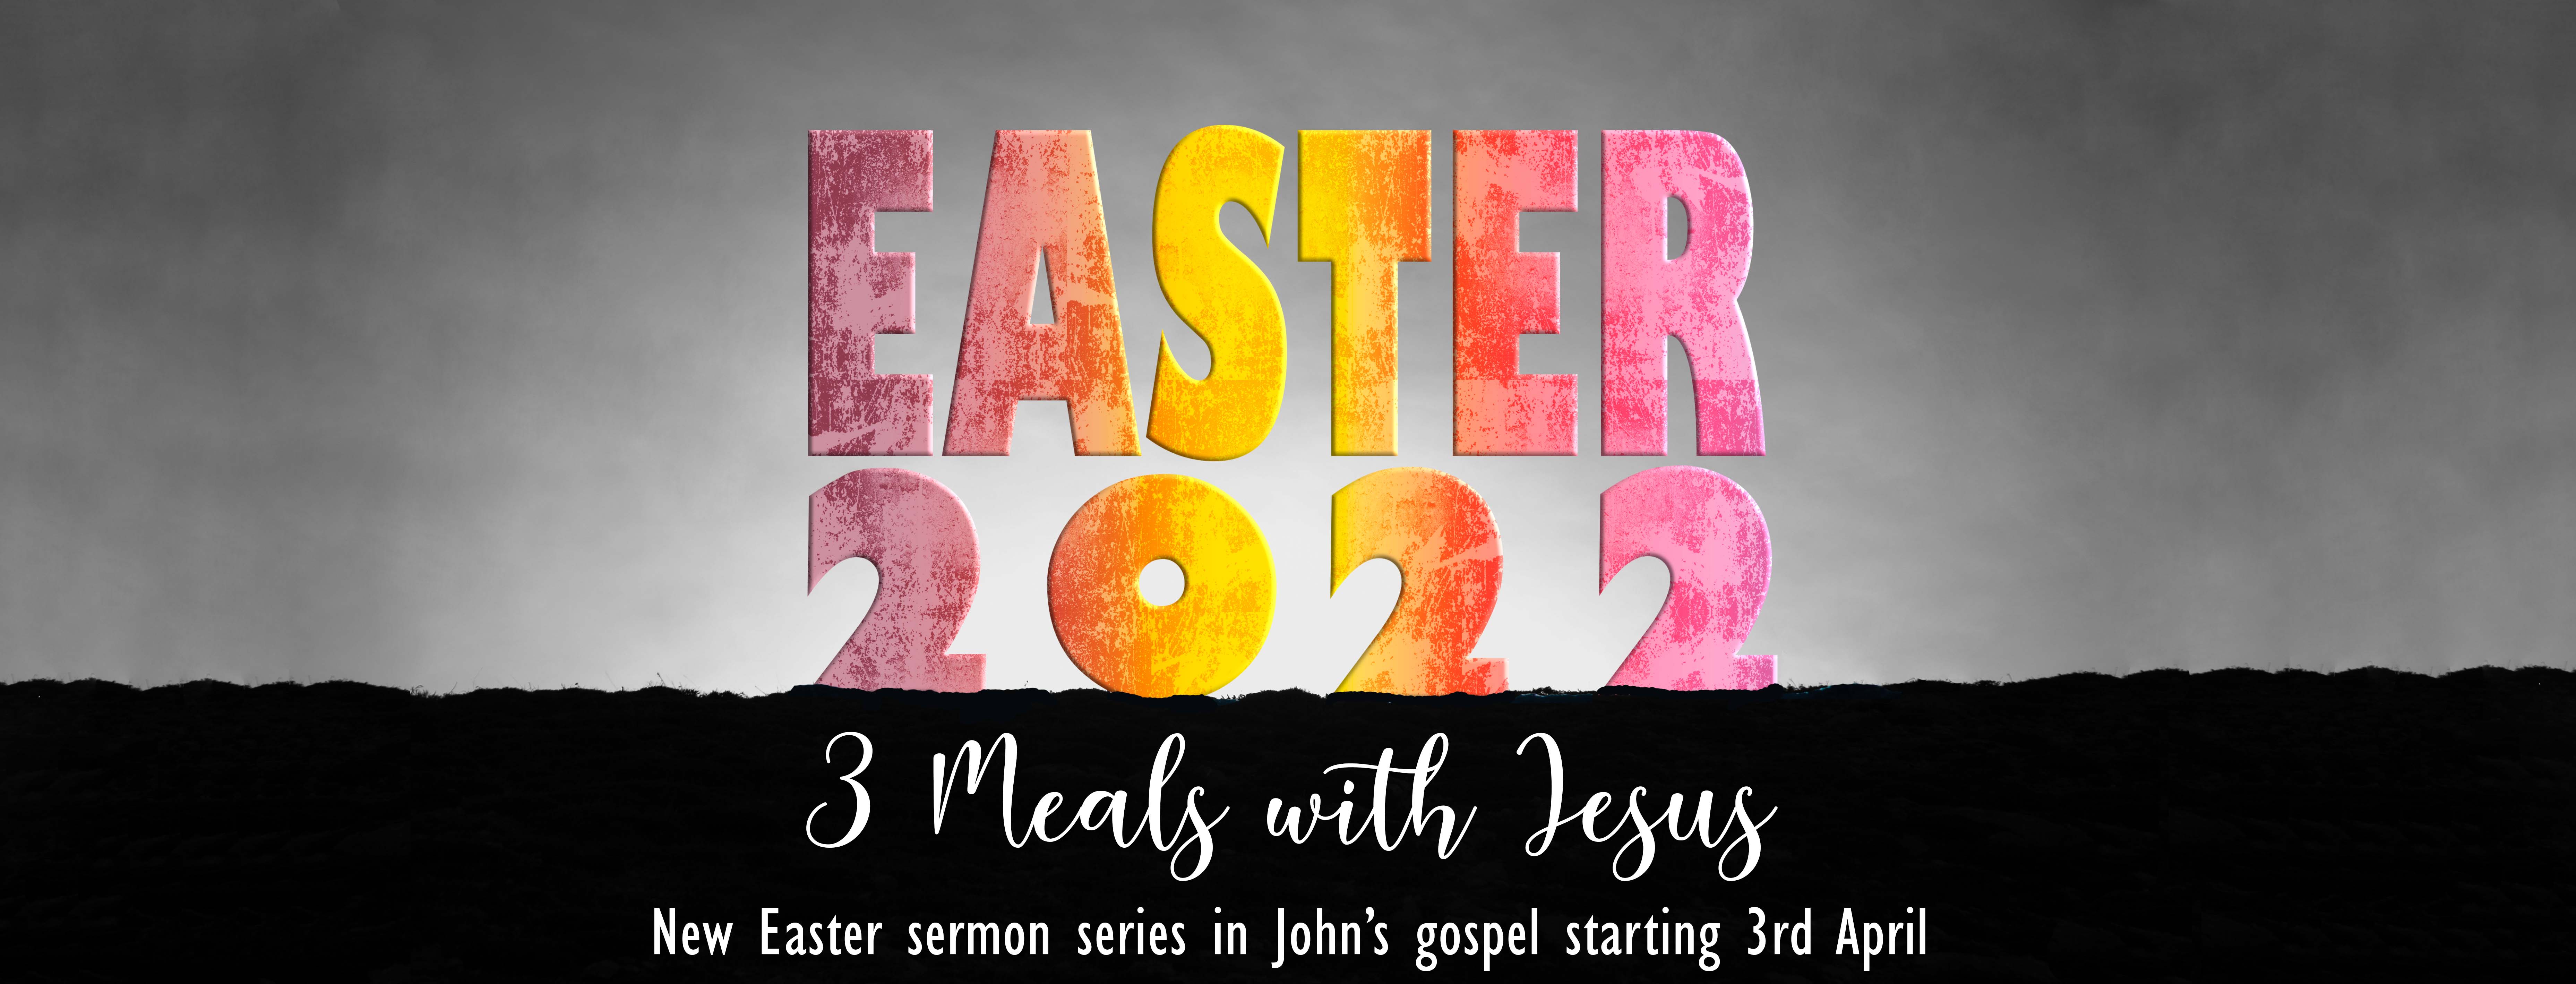 3 Meals with Jesus - Easter 2022